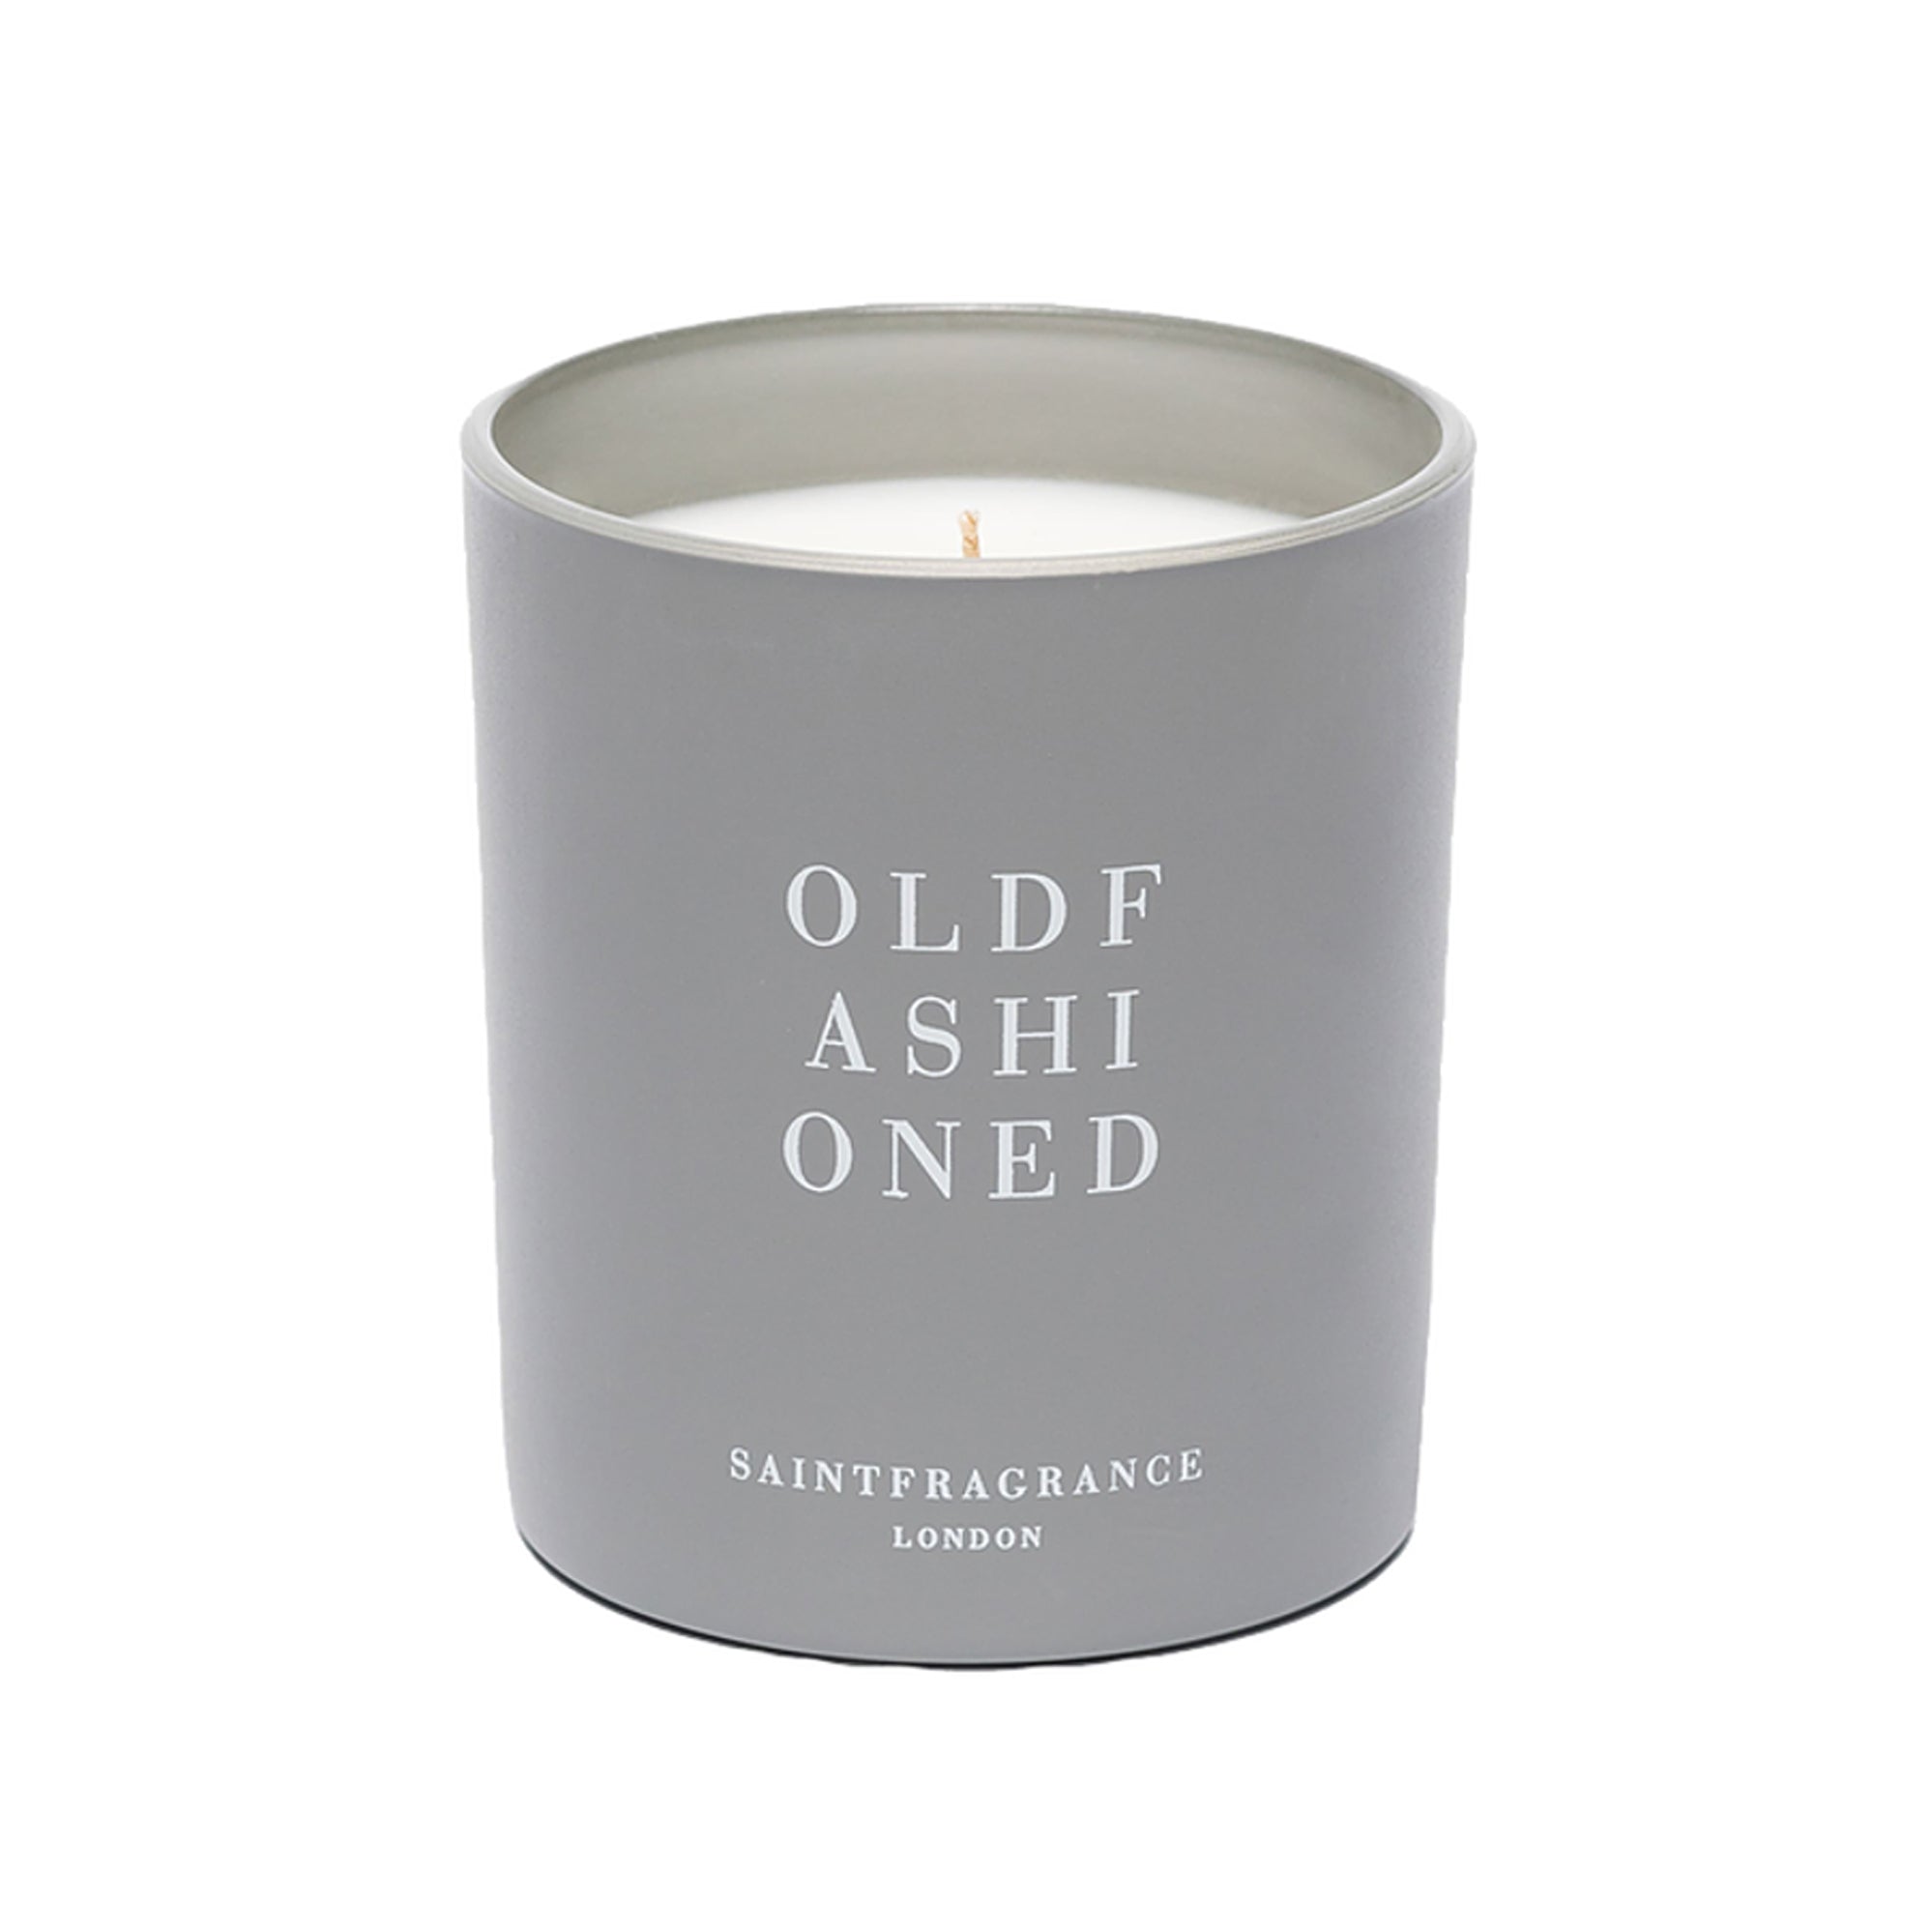 Old Fashioned 200g Scented Candle by Saint Fragrance